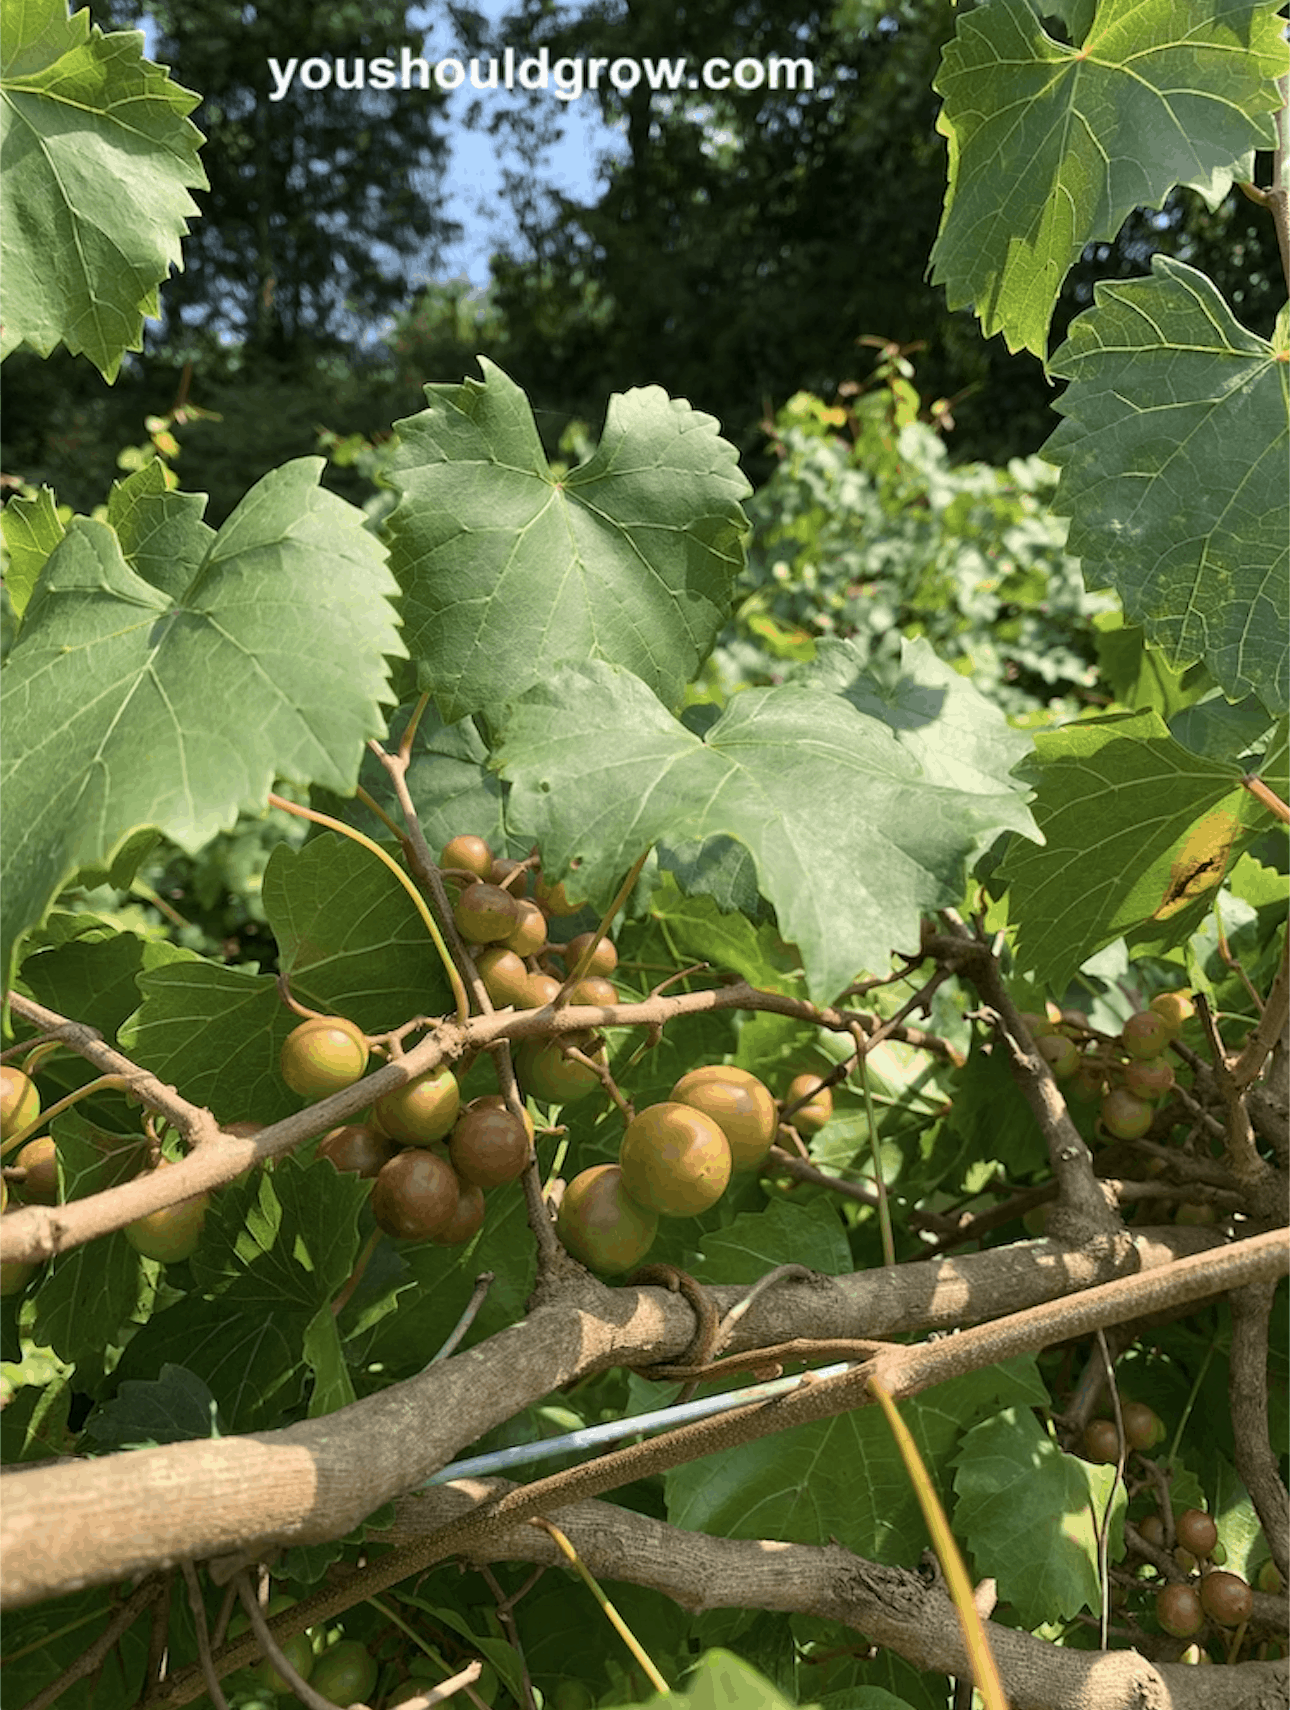 green muscadine grapes growing on a vine